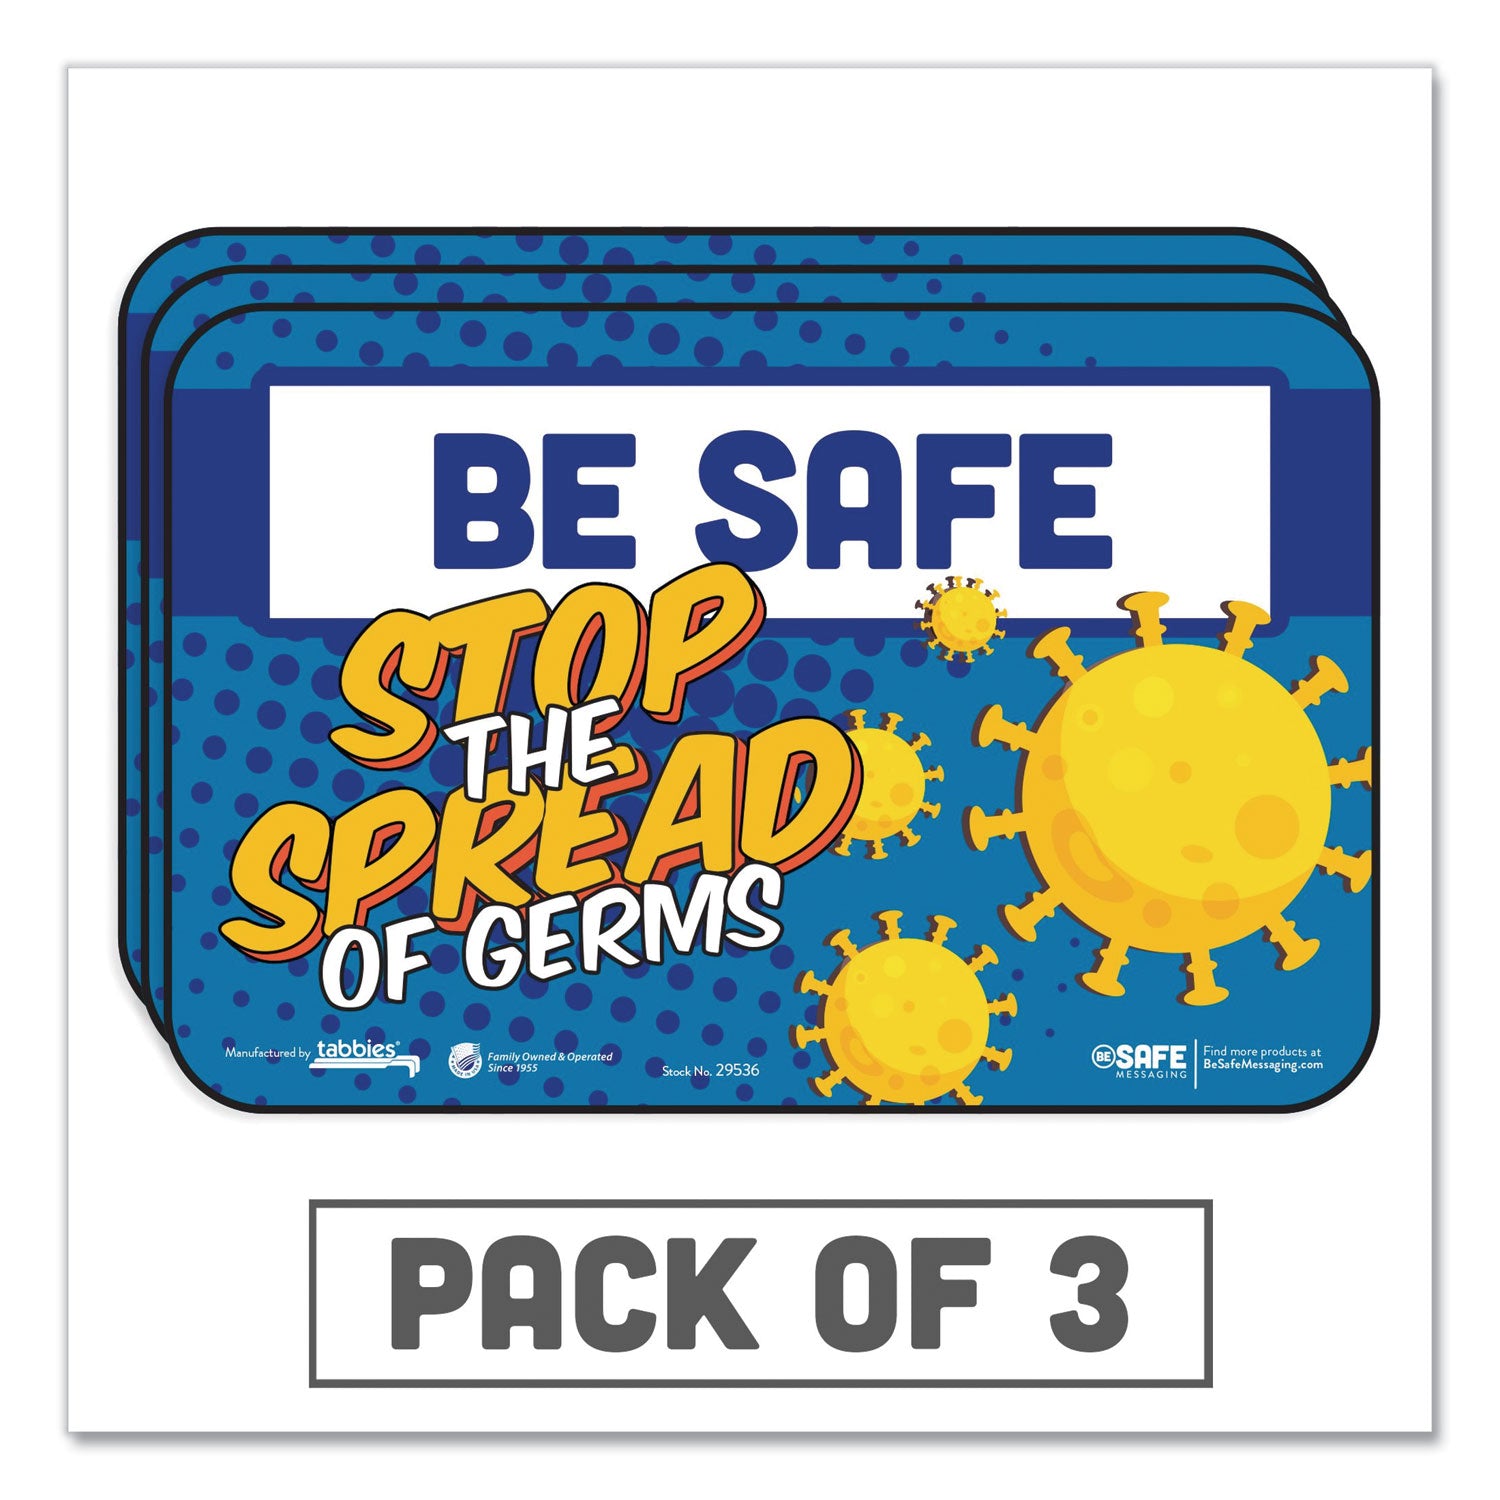 besafe-messaging-education-wall-signs-9-x-6-be-safe-stop-the-spread-of-germs-3-pack_tab29536 - 1